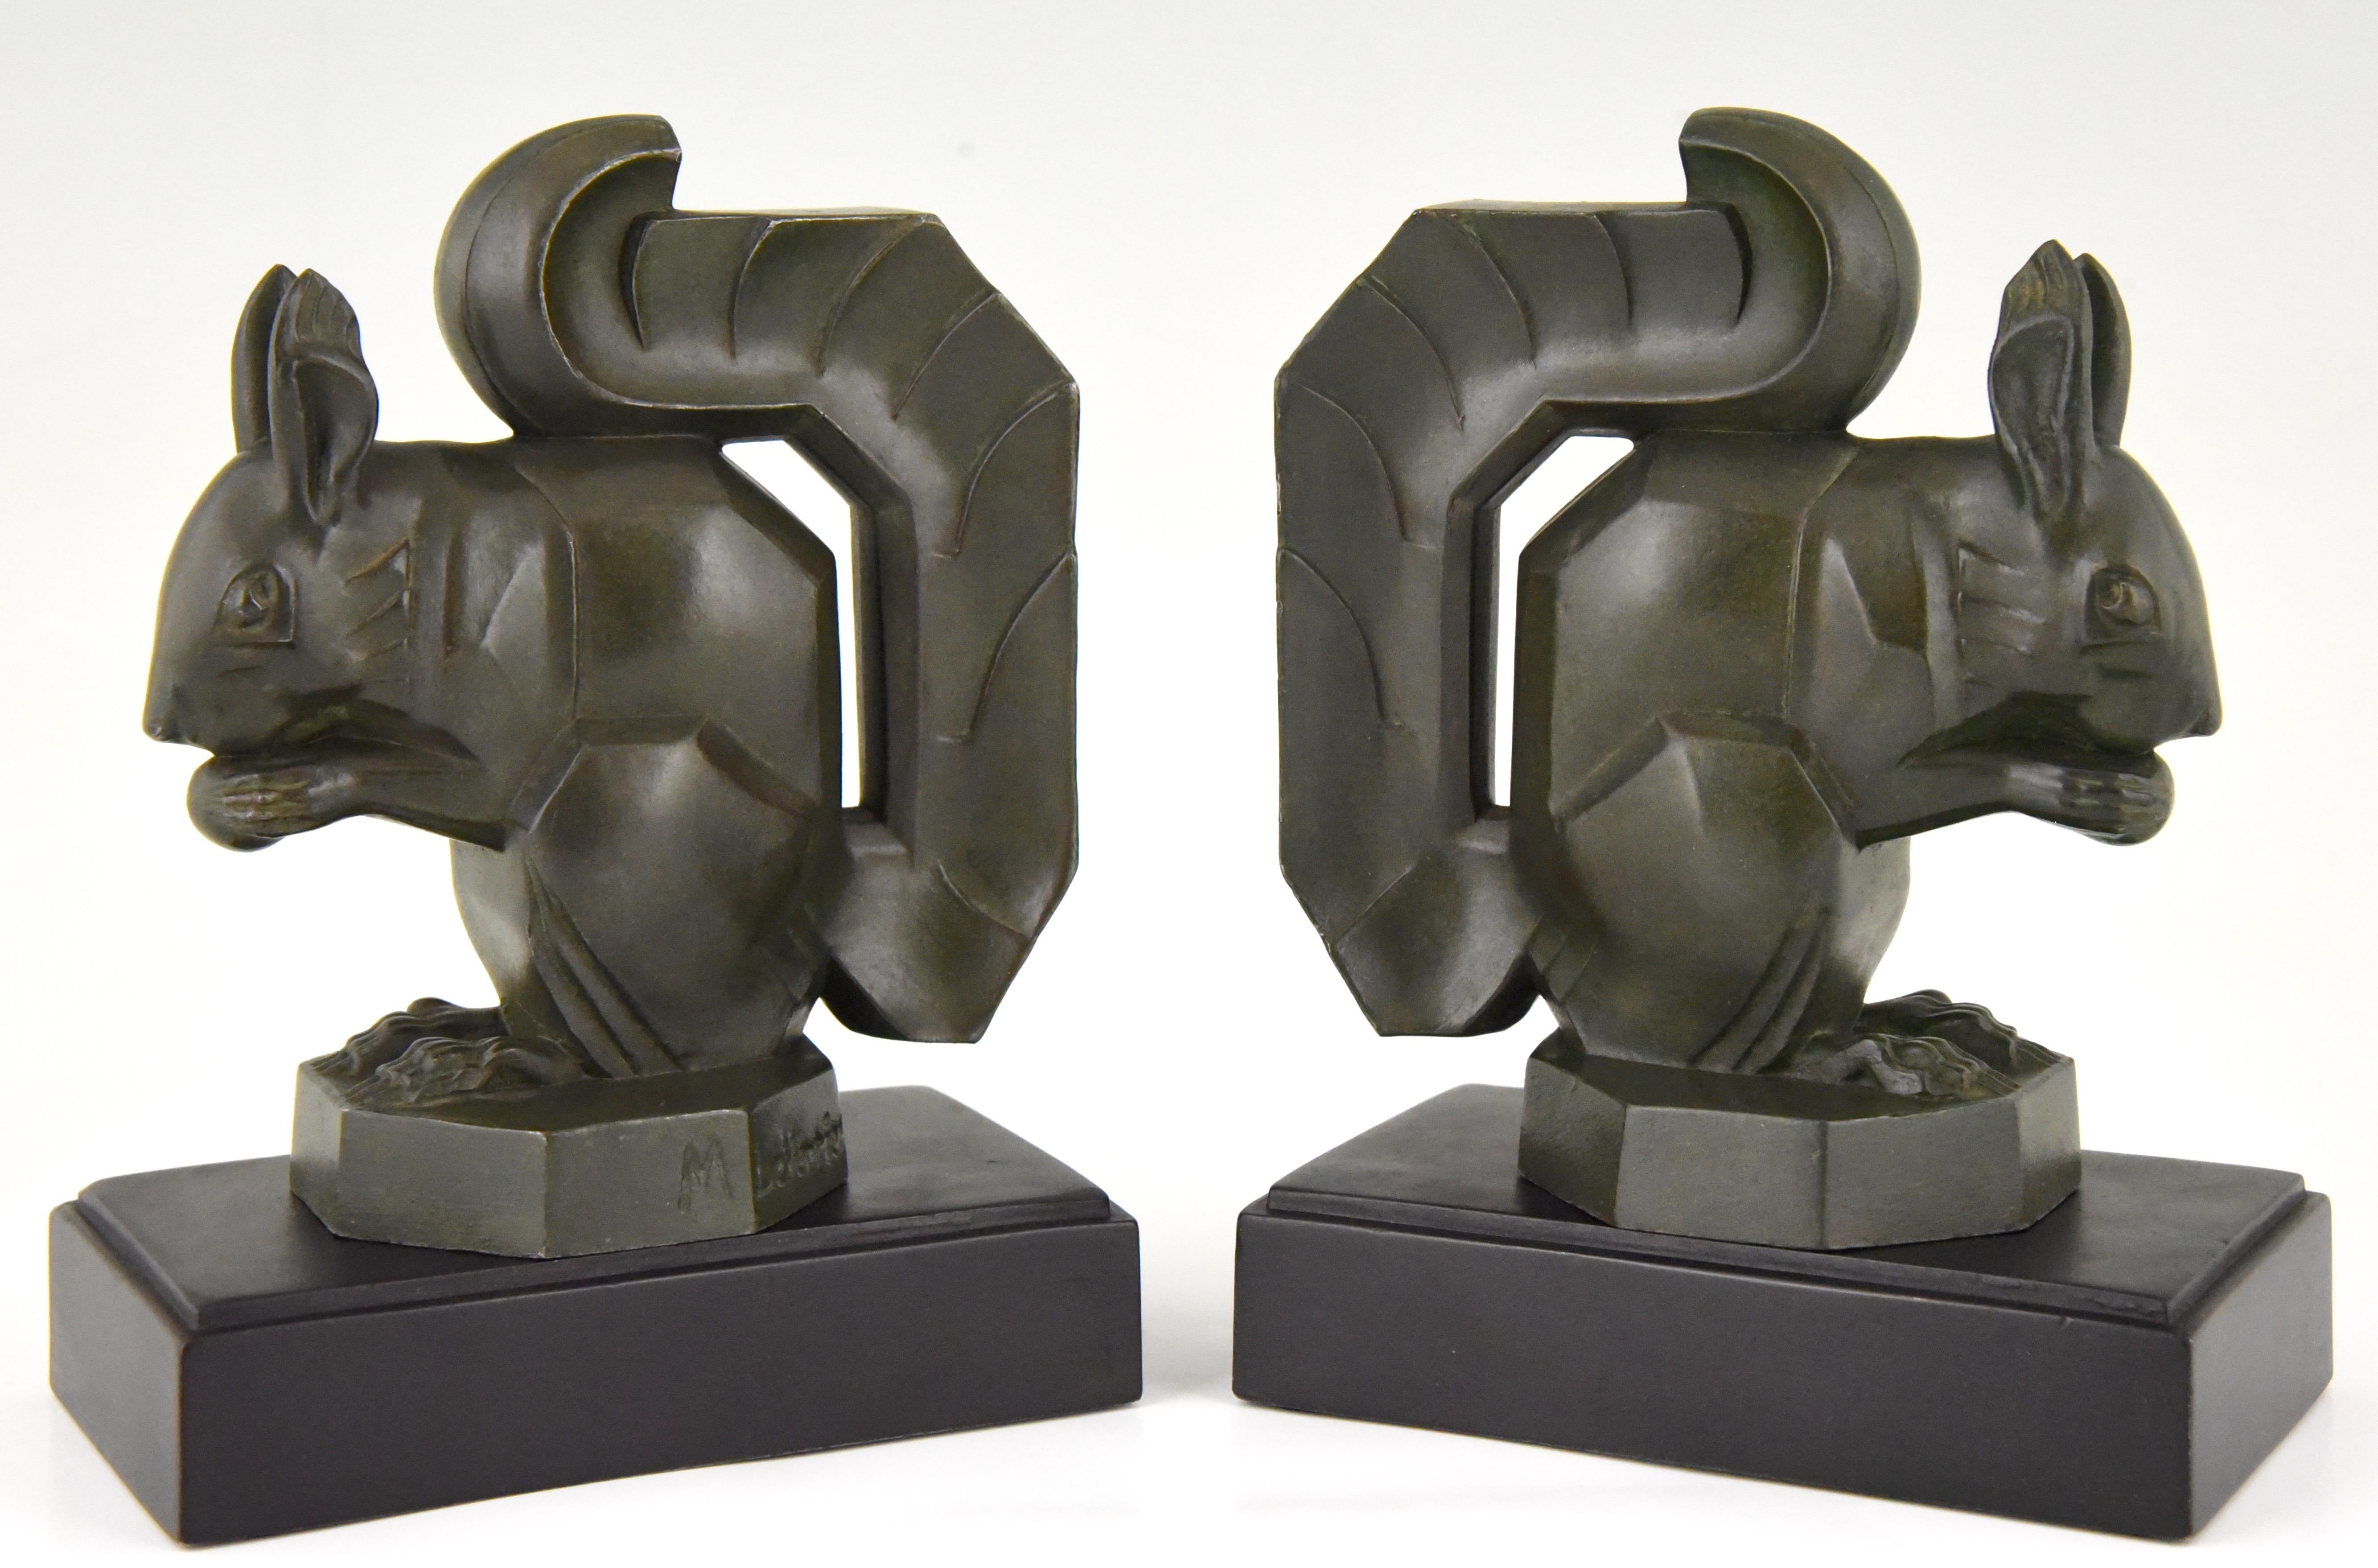 Typical Art Deco bookends modelled as squirrels eating a nut, signed by the French artist Max Le Verrier in art metal with lovely green patina, circa 1930.
“Art Deco sculpture” by Victor Arwas, Academy. ?“Bronzes, sculptors and founders” by H.